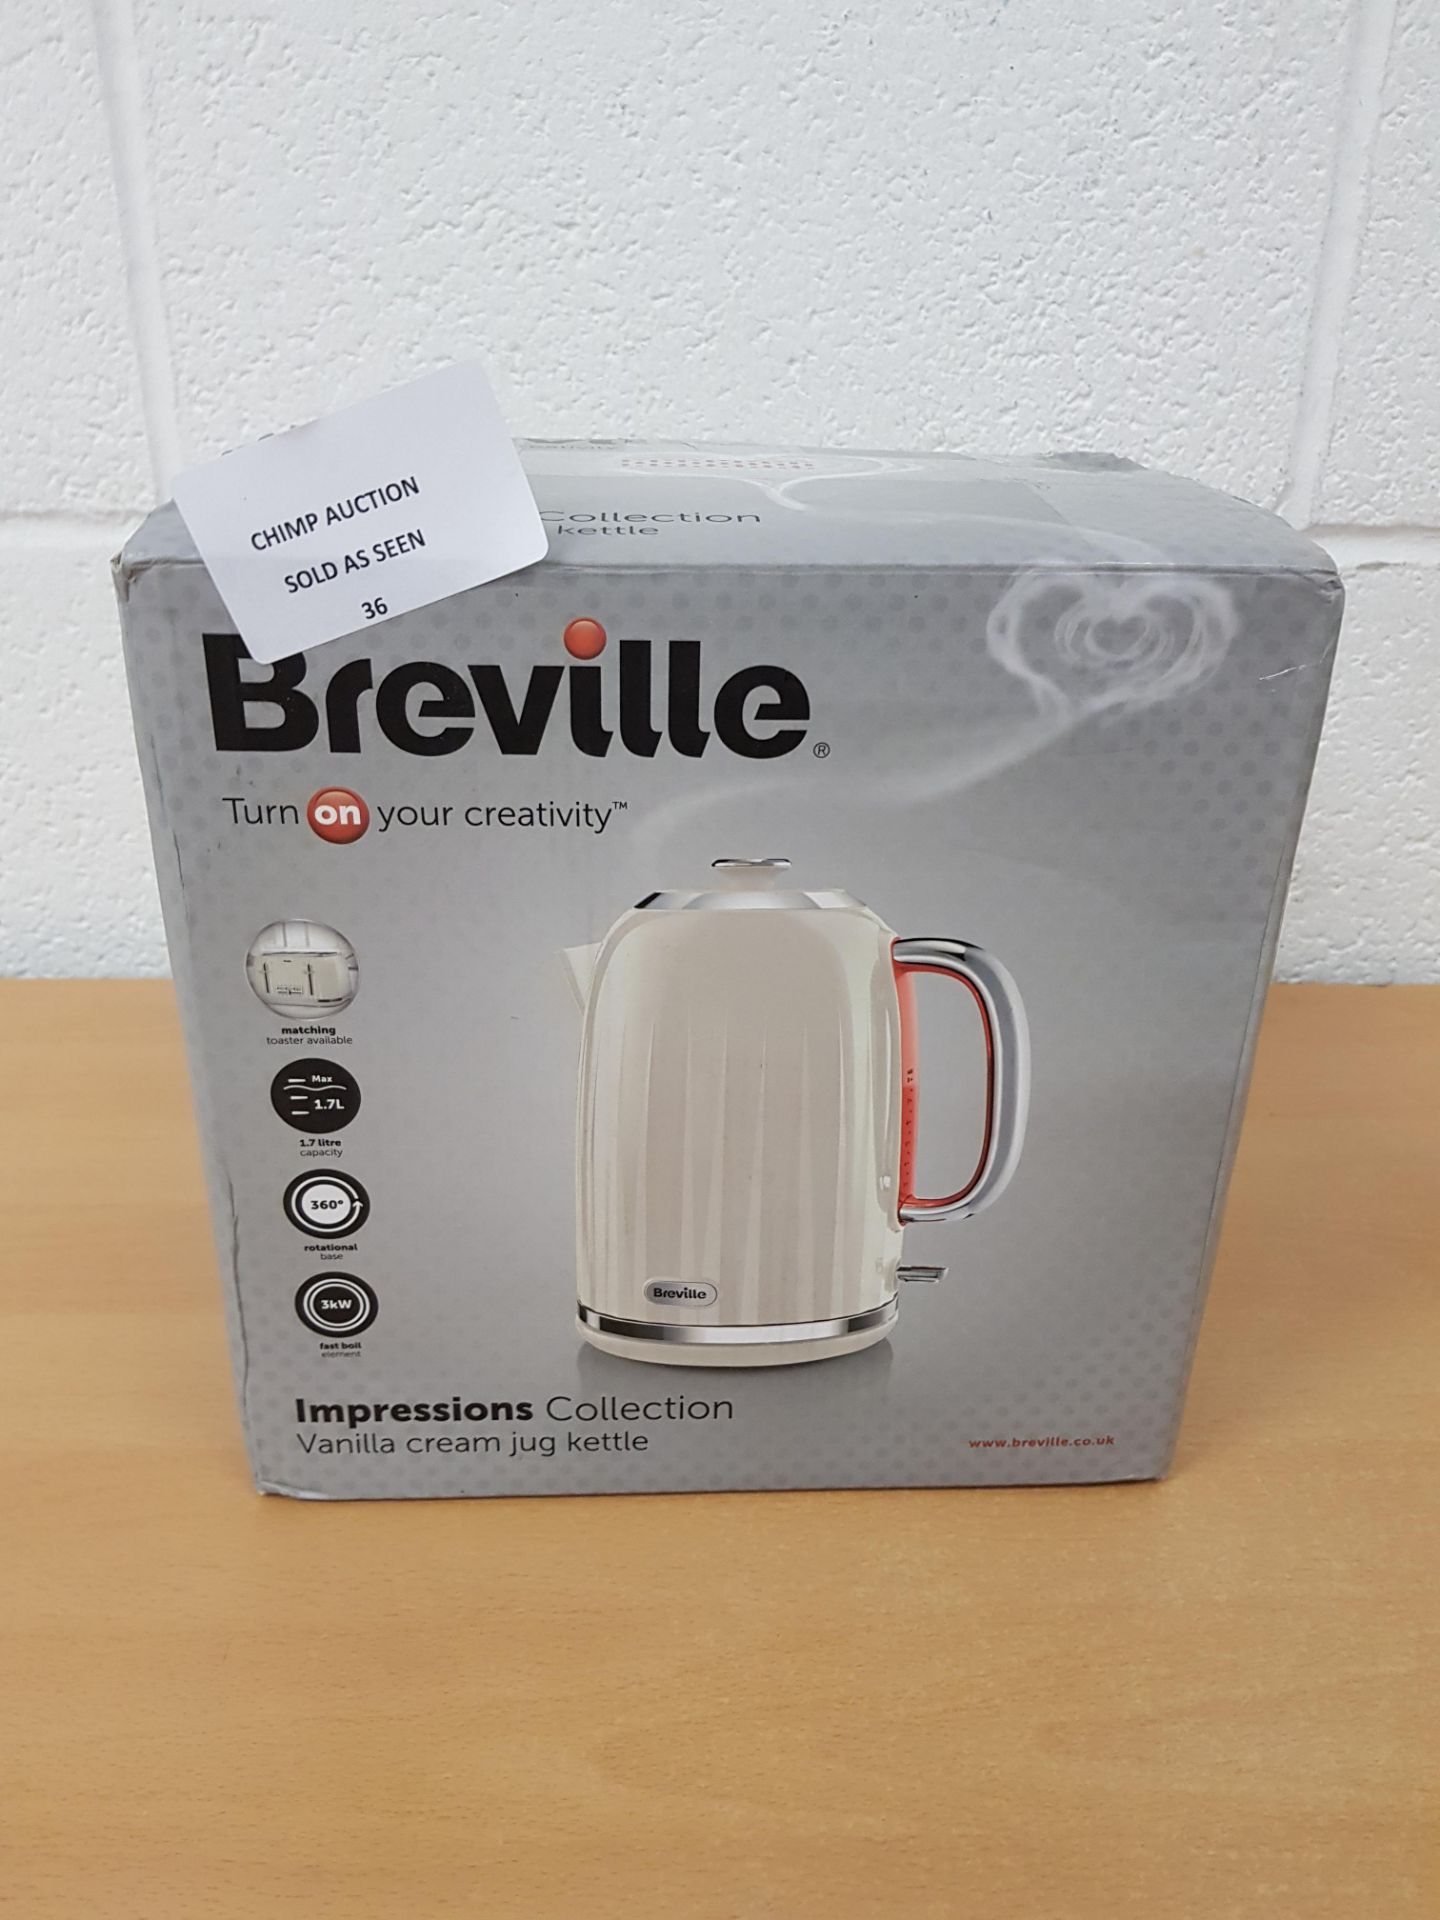 Breville Impressions Collections jug kettle